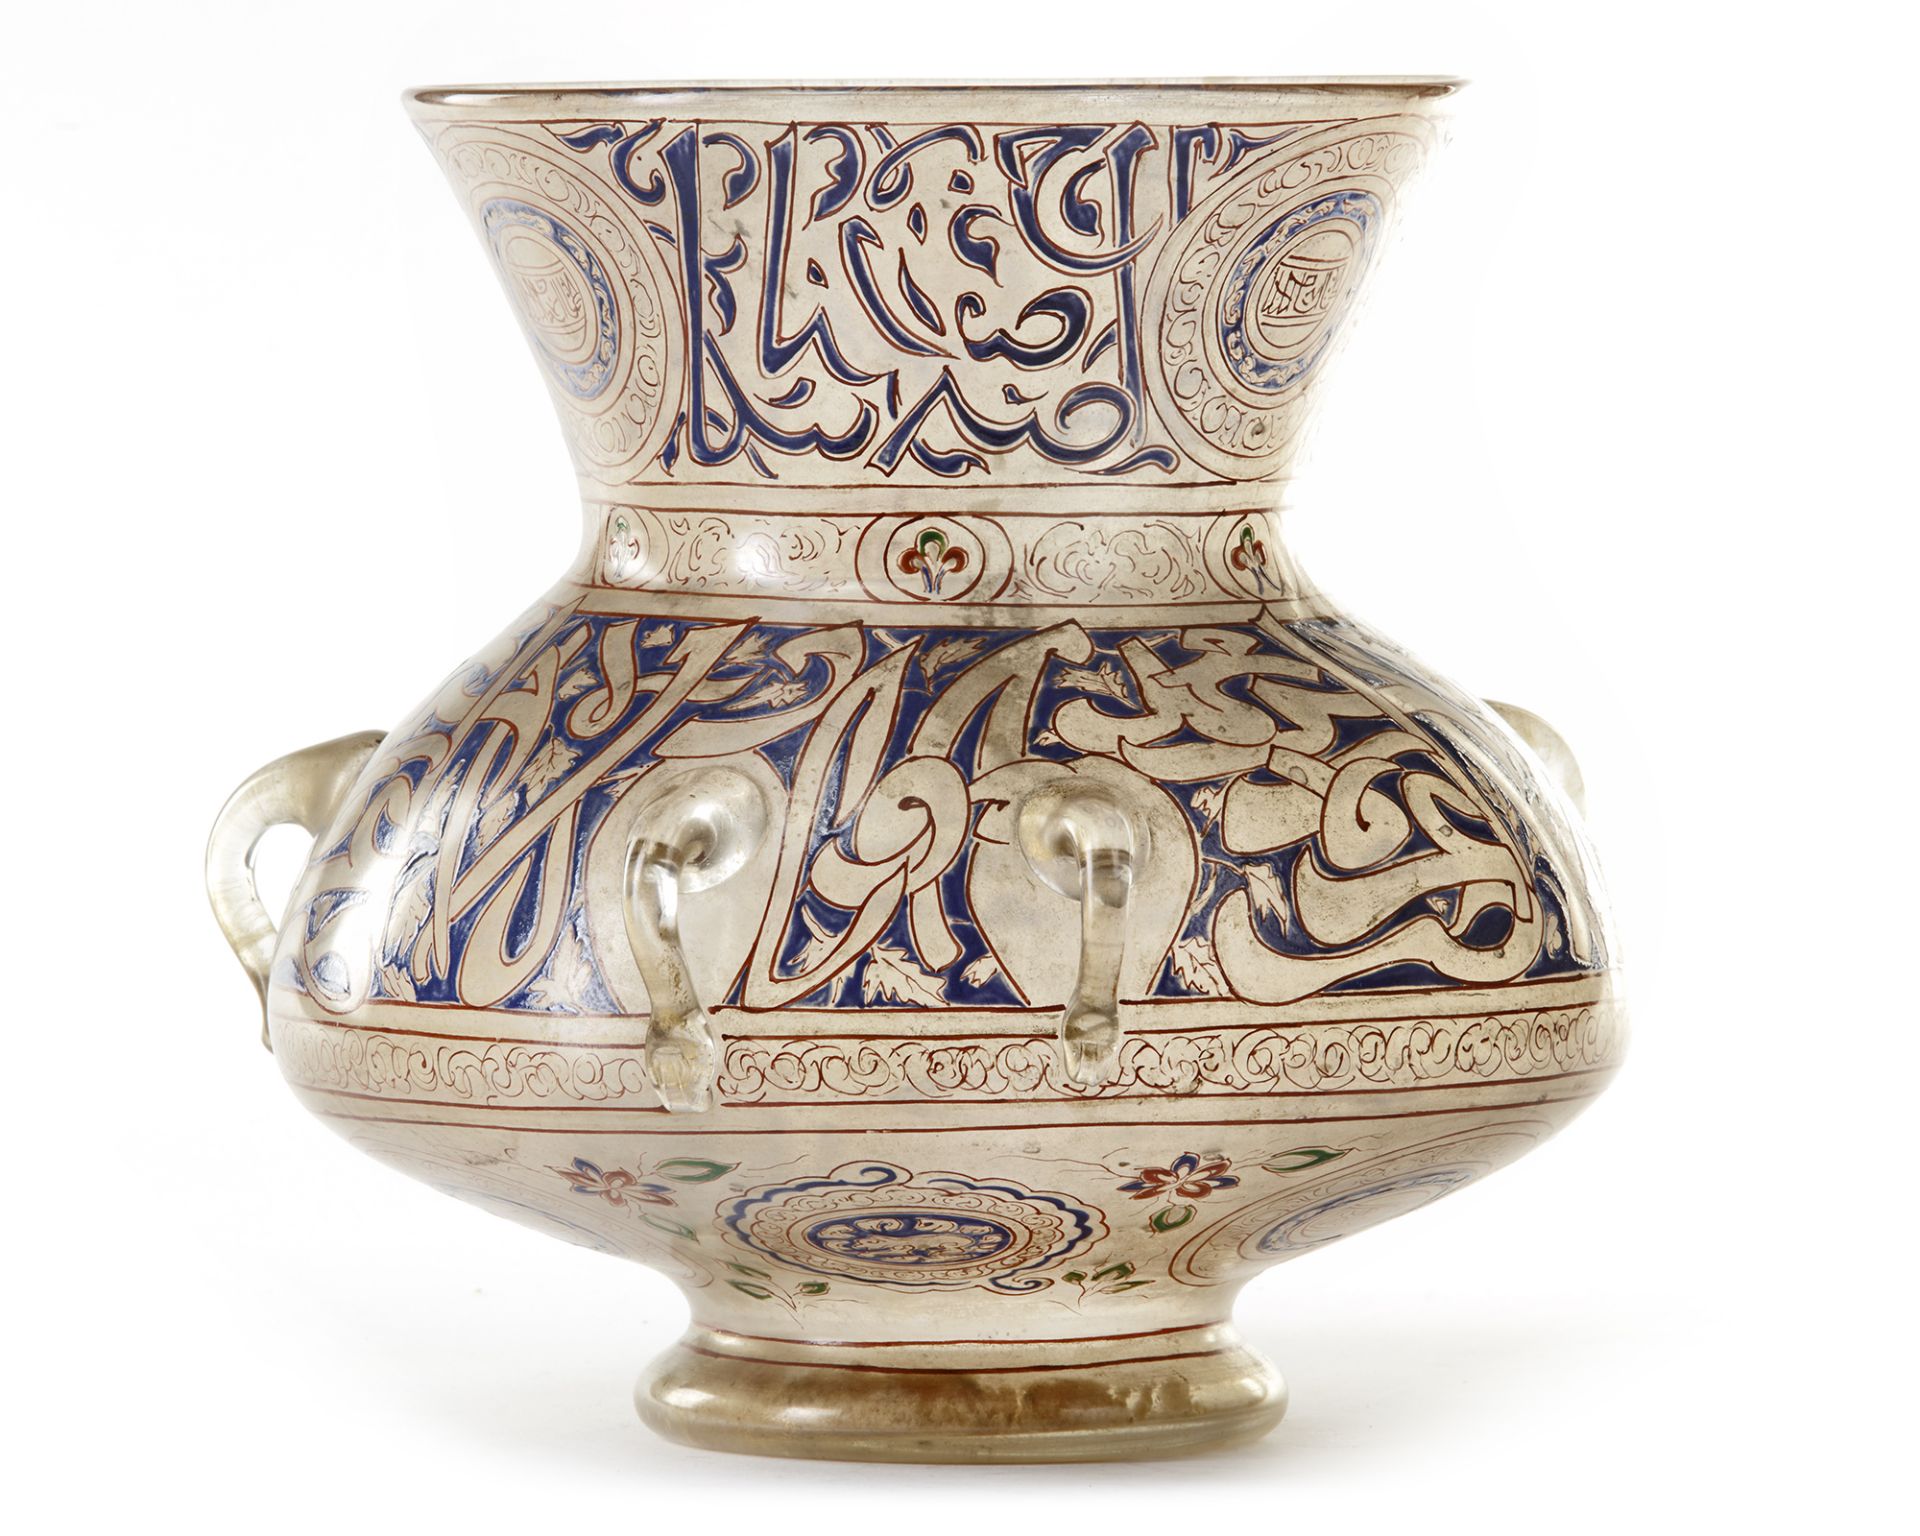 A MAMLUK-STYLE ENAMELLED CLEAR GLASS MOSQUE LAMP POSSIBLY BROCARD, FRANCE, SECOND HALF 19TH CENTURY